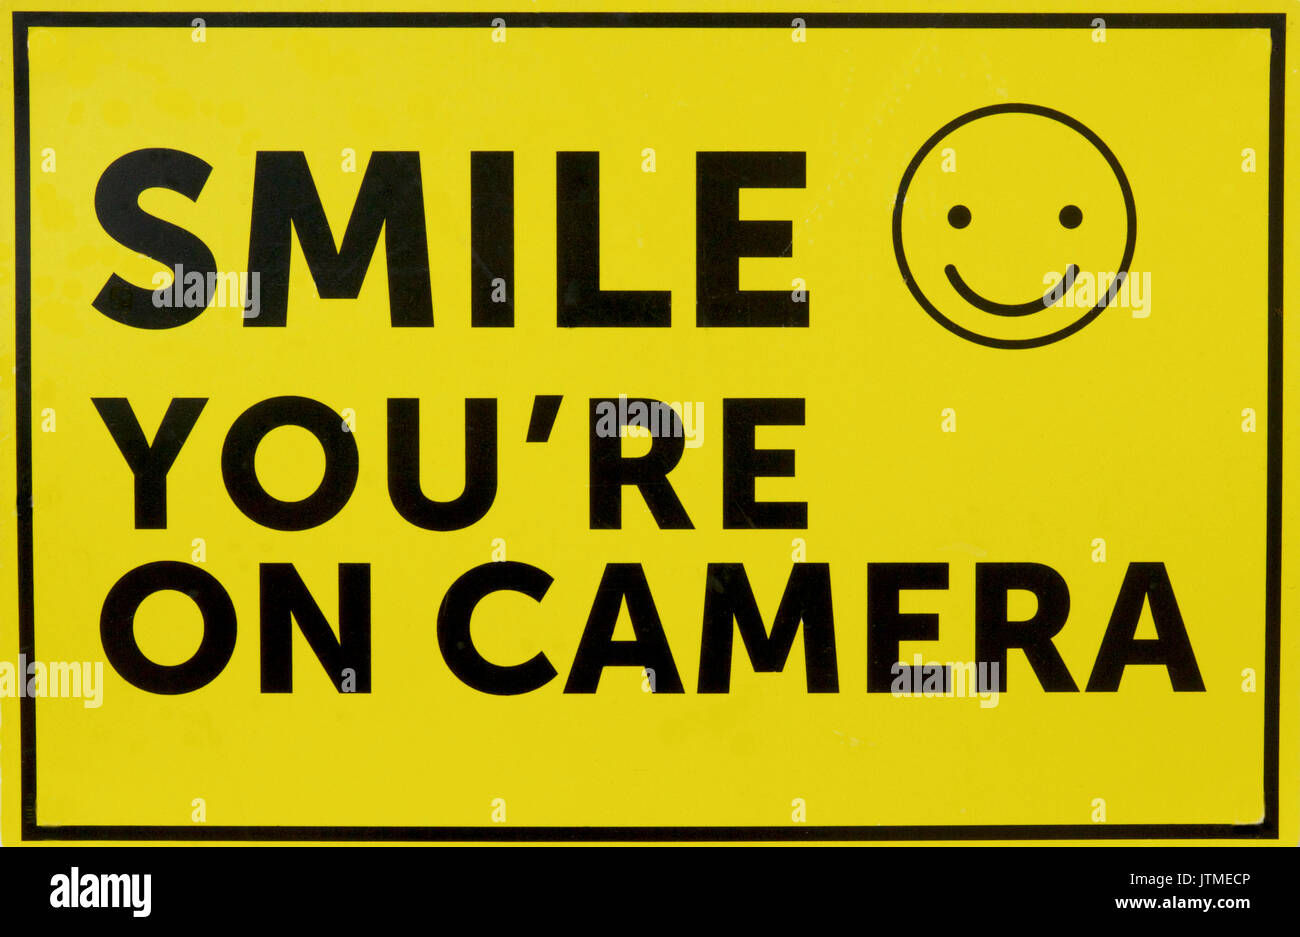 smile-you-re-on-camera-sign-stock-photo-alamy